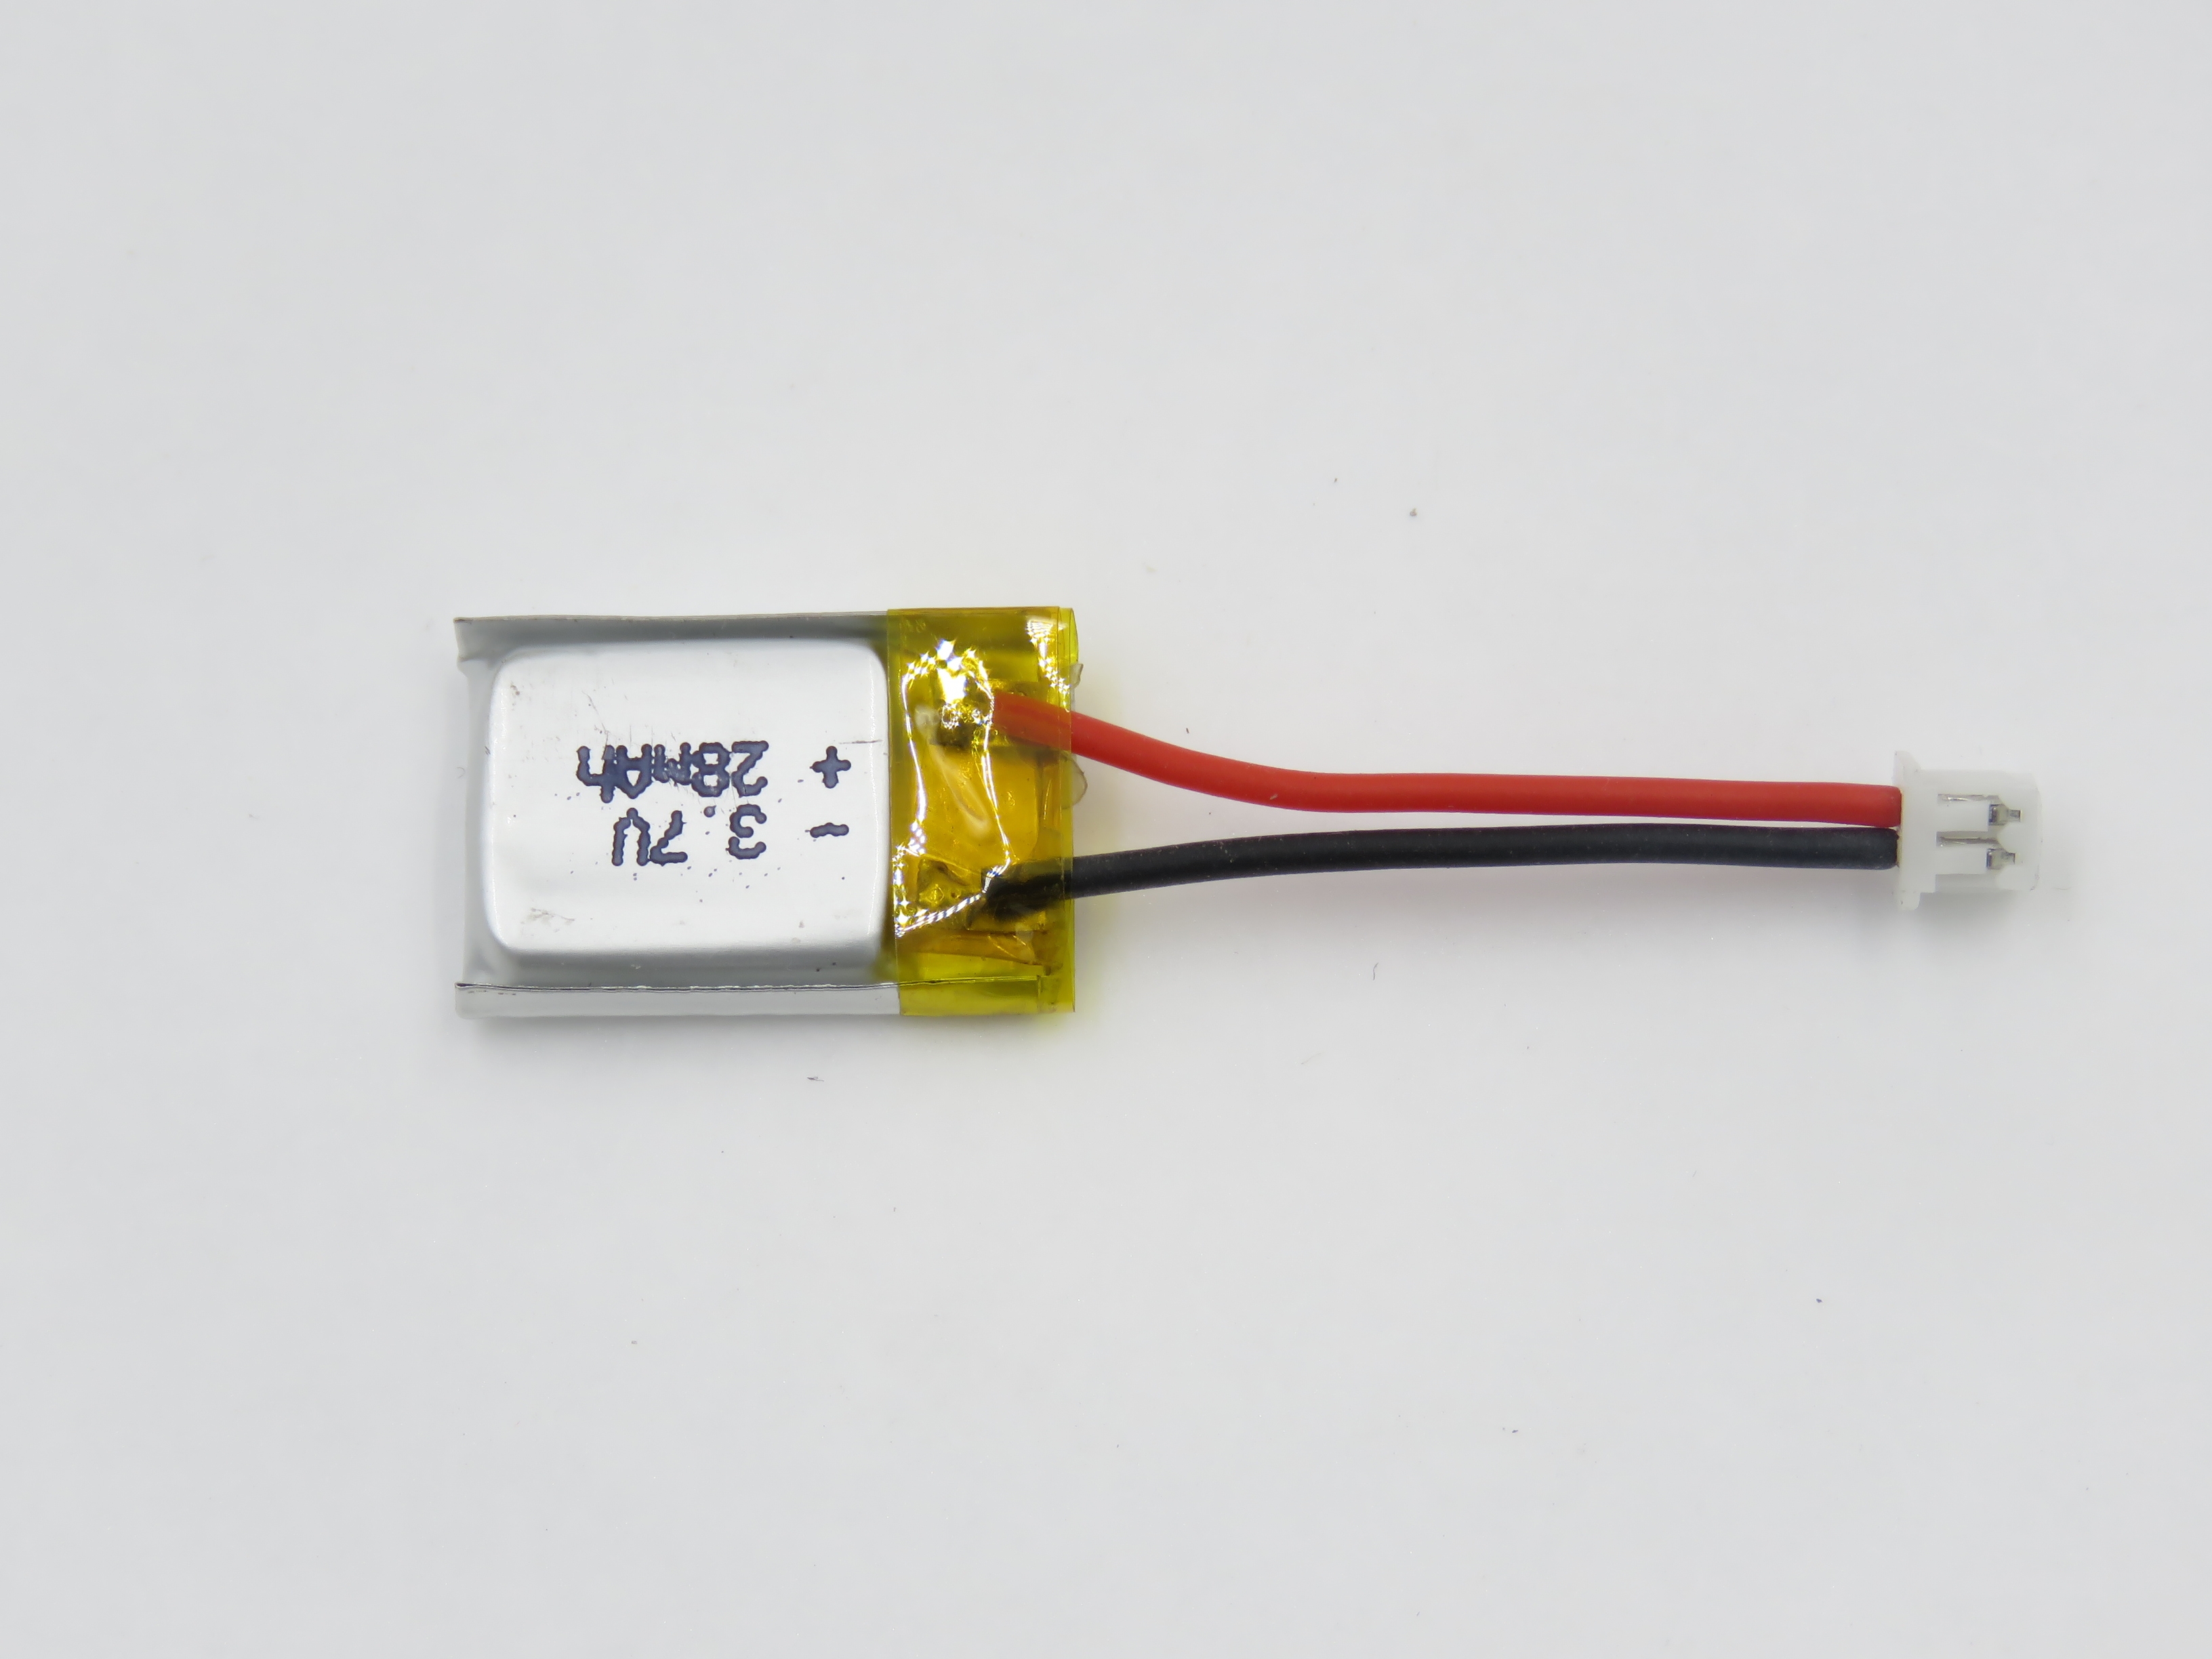 1S 3.7V 28mAh 15C LiPo Battery With JST-SH 1.25mm Plug For RC Airplane